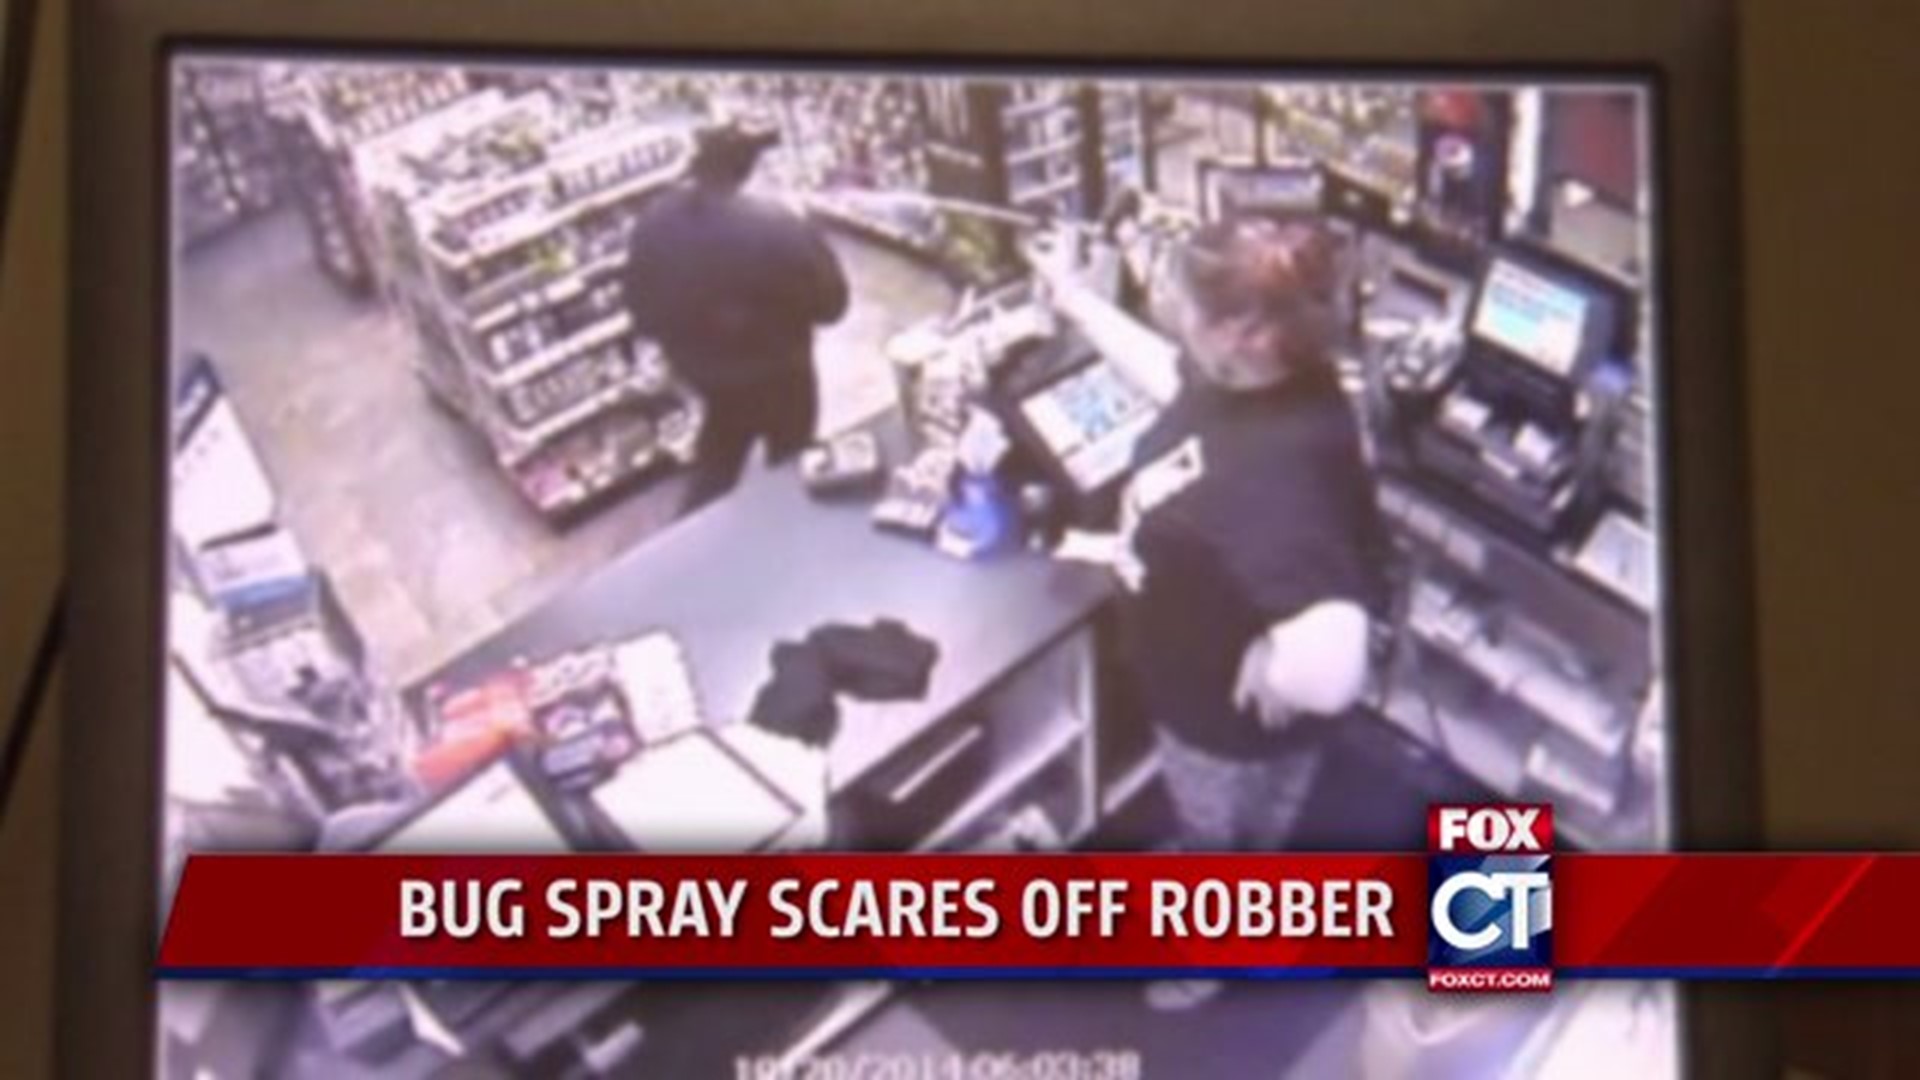 MUST WATCH: Cashier scares off robber with bug spray